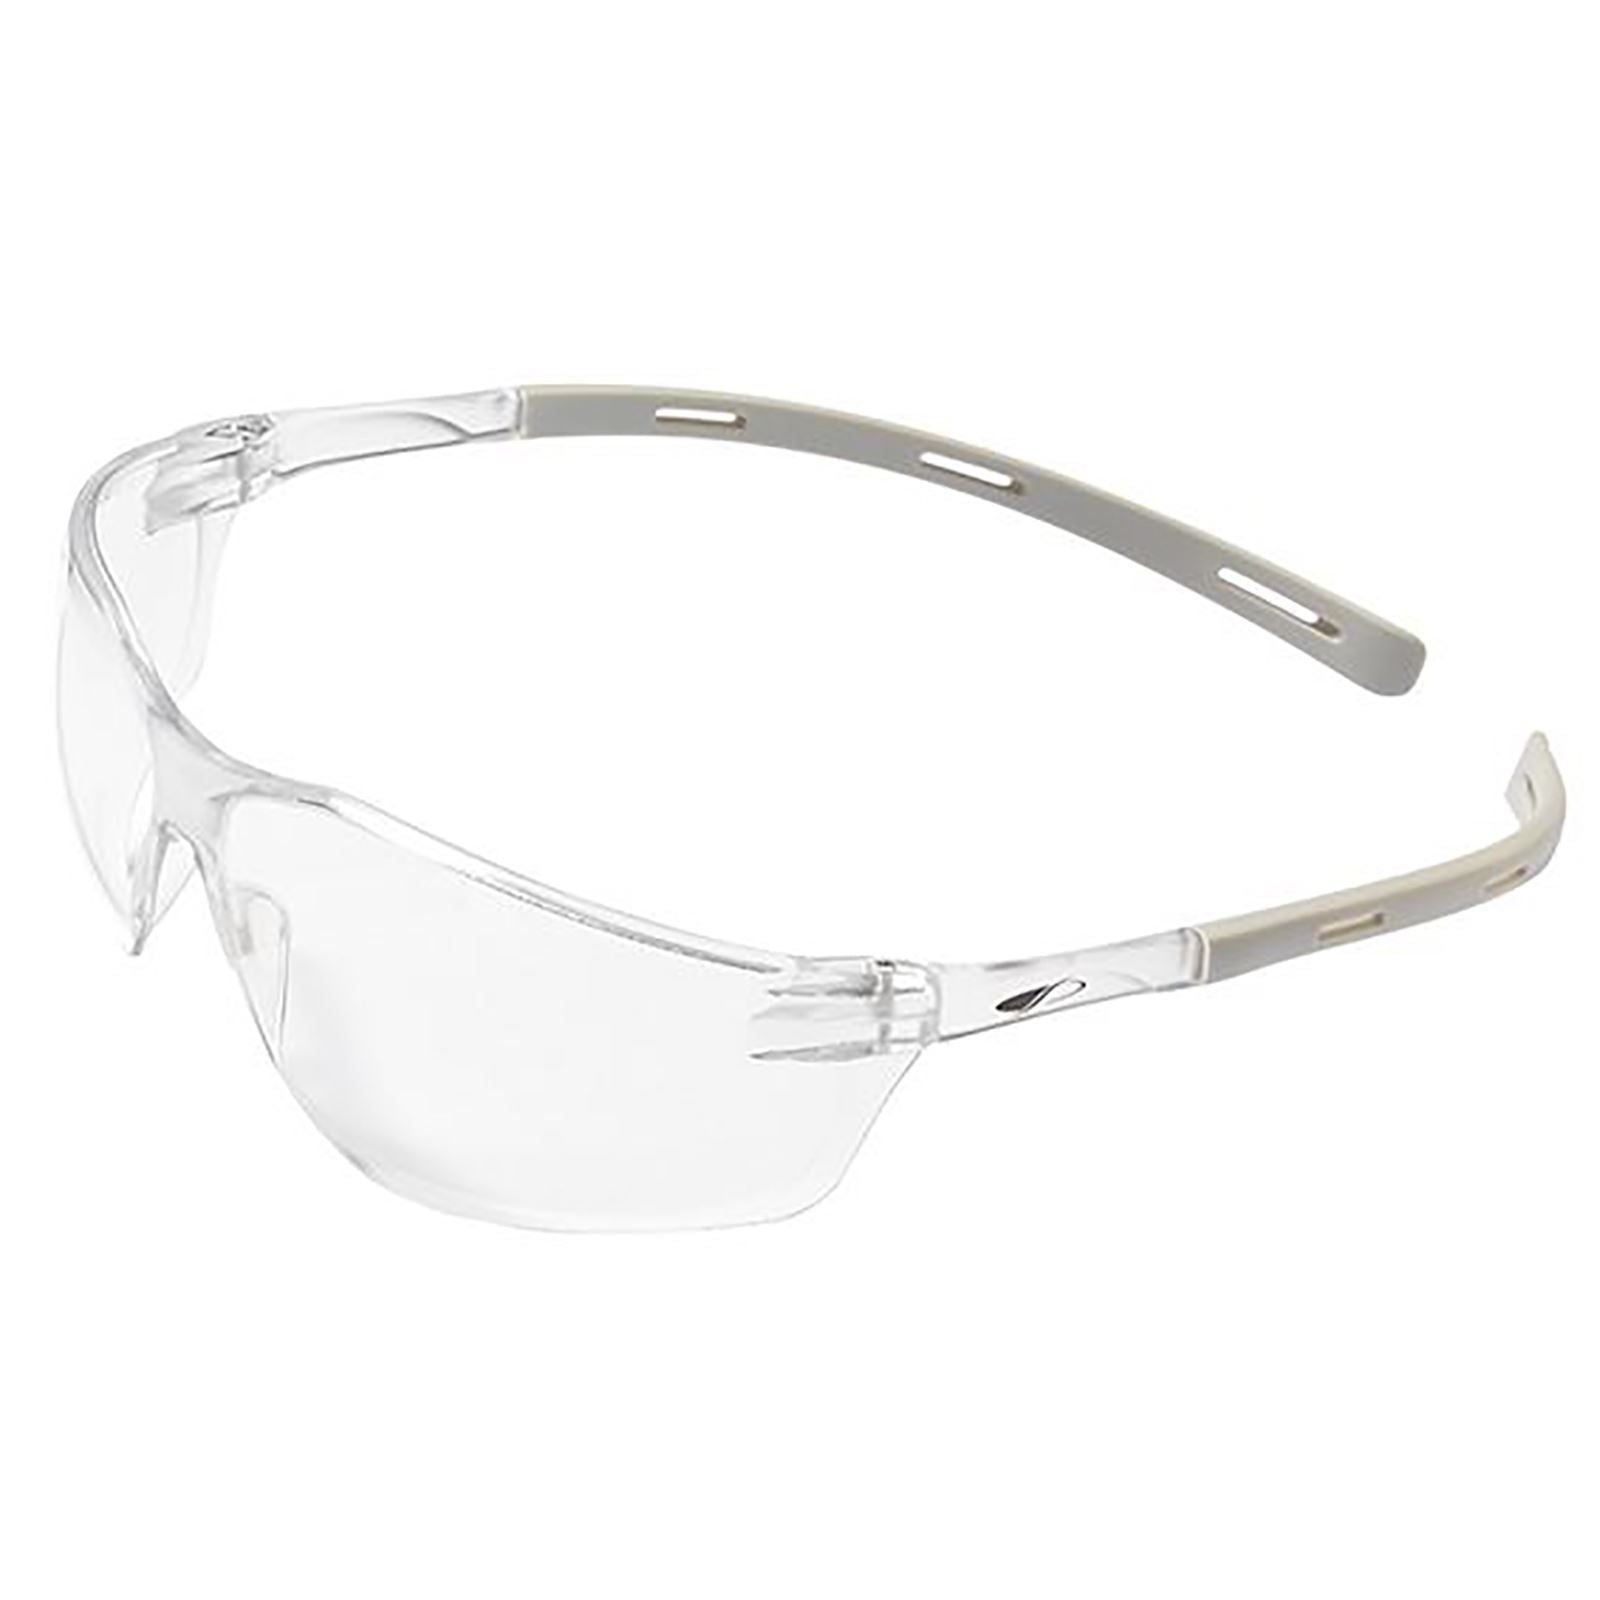 Swiss One Rigi Safety Glasses Light Grey Temples Clear Lens Anti Scratch